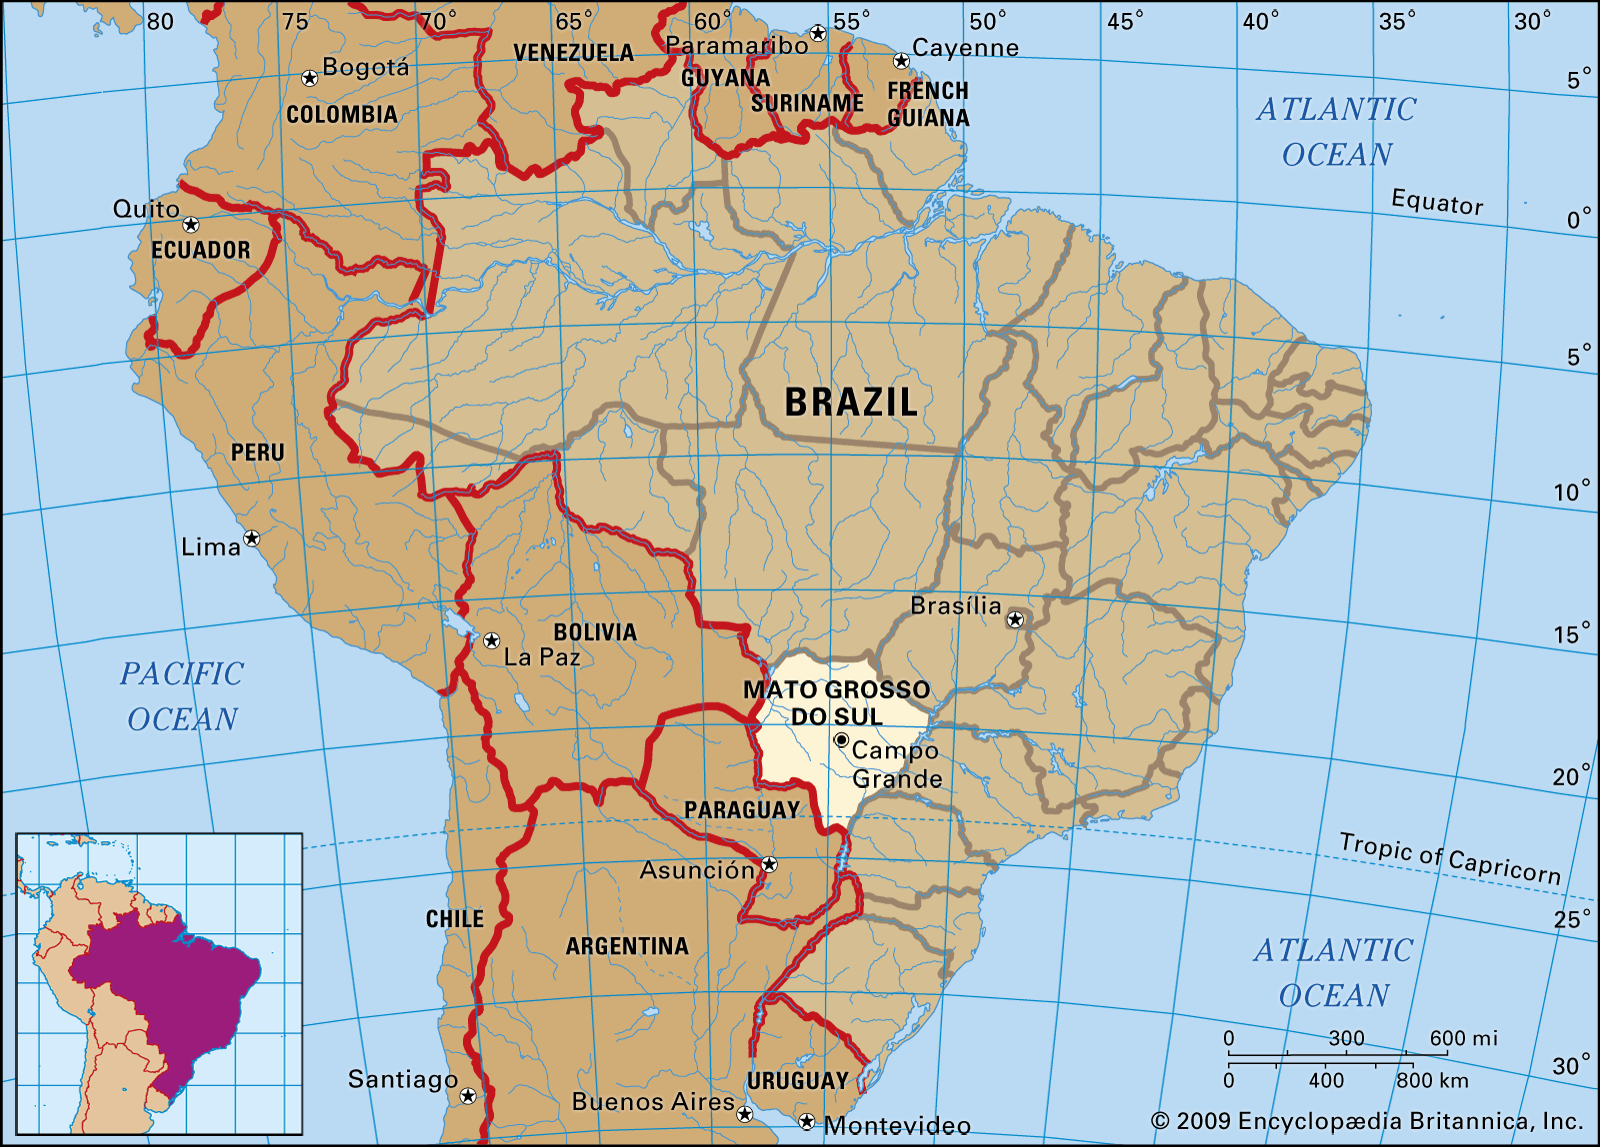 Brazil's southern state Mato Grosso do Sul, which borders Paraguay and Bolivia, on Friday declared a curfew to help curb an increase in cases of COVID-19.